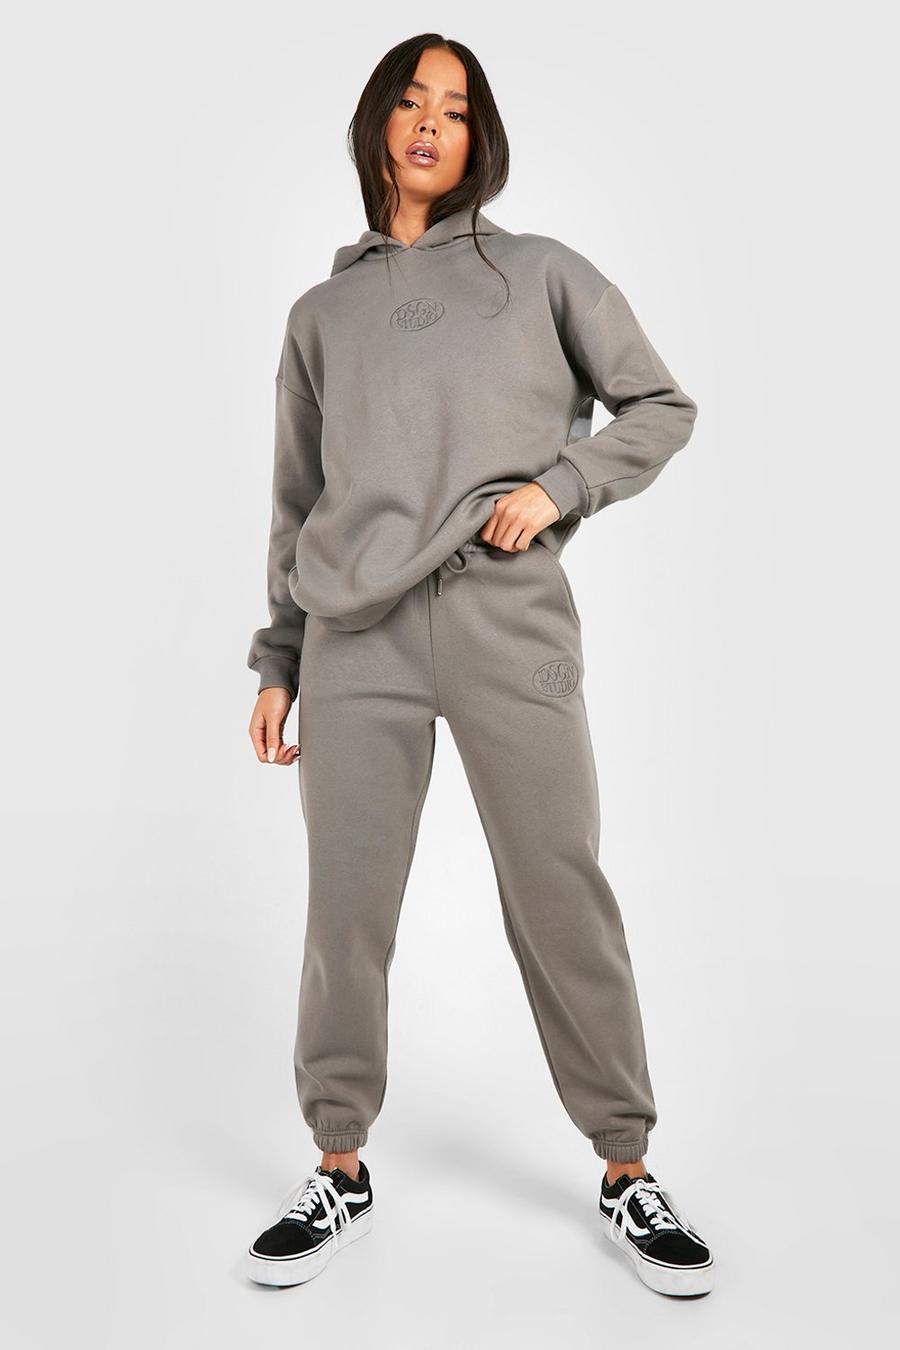 Charcoal gris Petite Embroidery Dsgn Hoody & Jogger Tracksuit